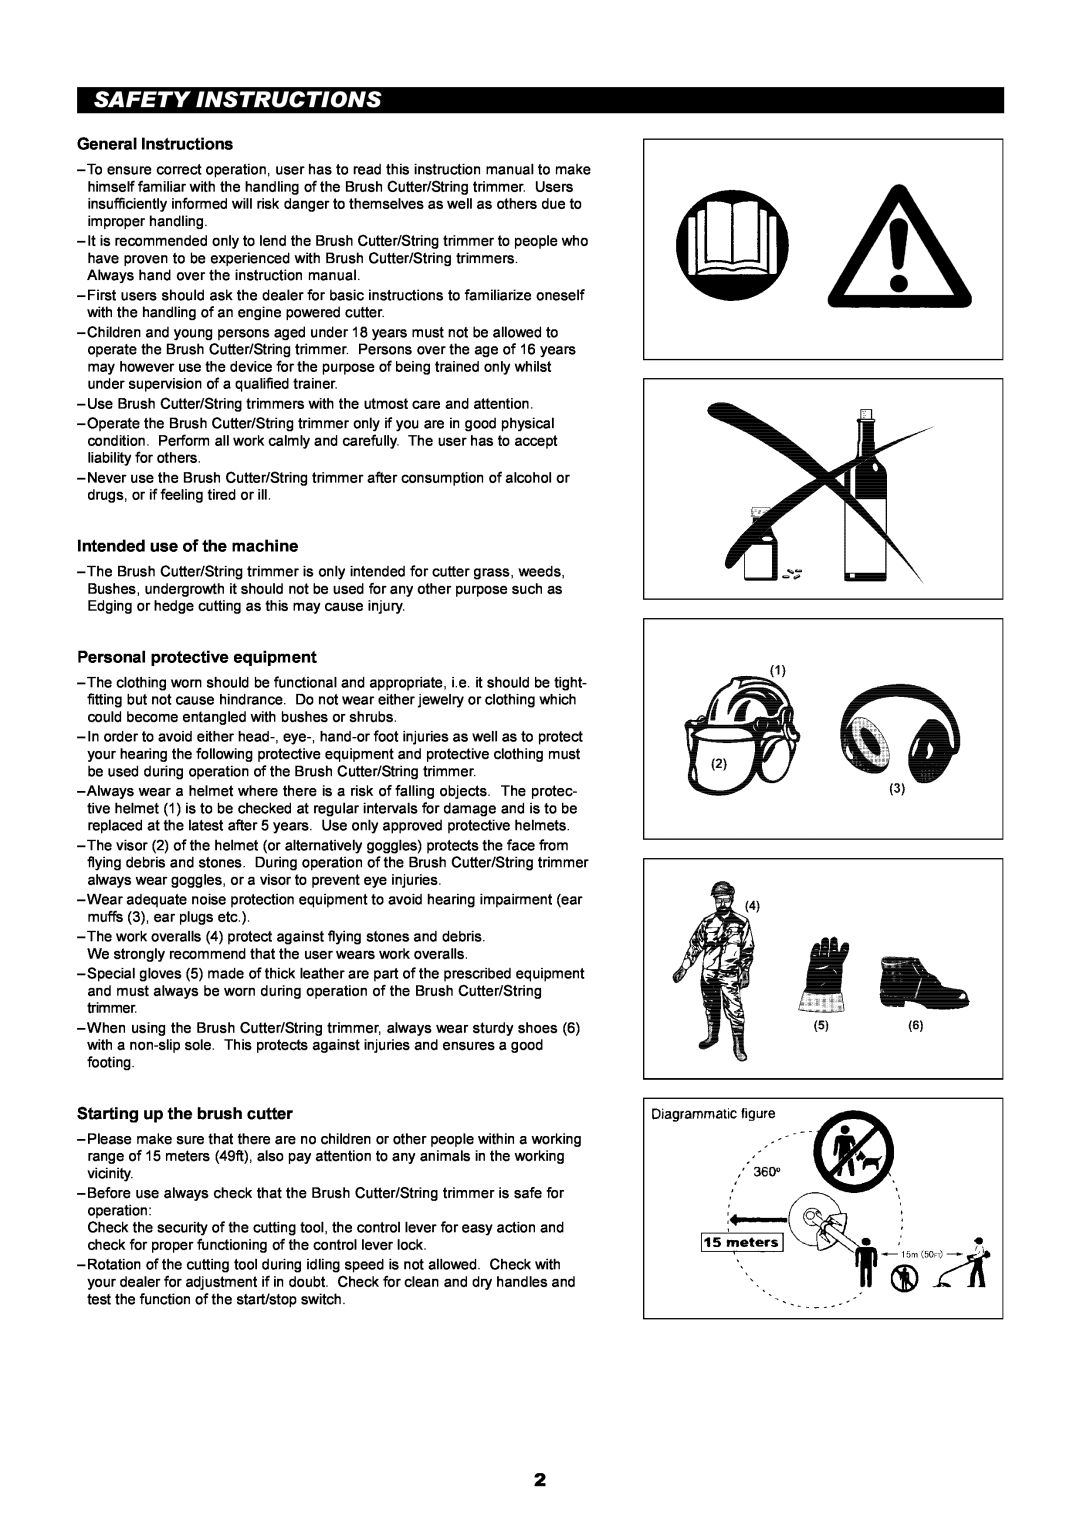 Makita RBC2500 Safety Instructions, General Instructions, Intended use of the machine, Personal protective equipment 